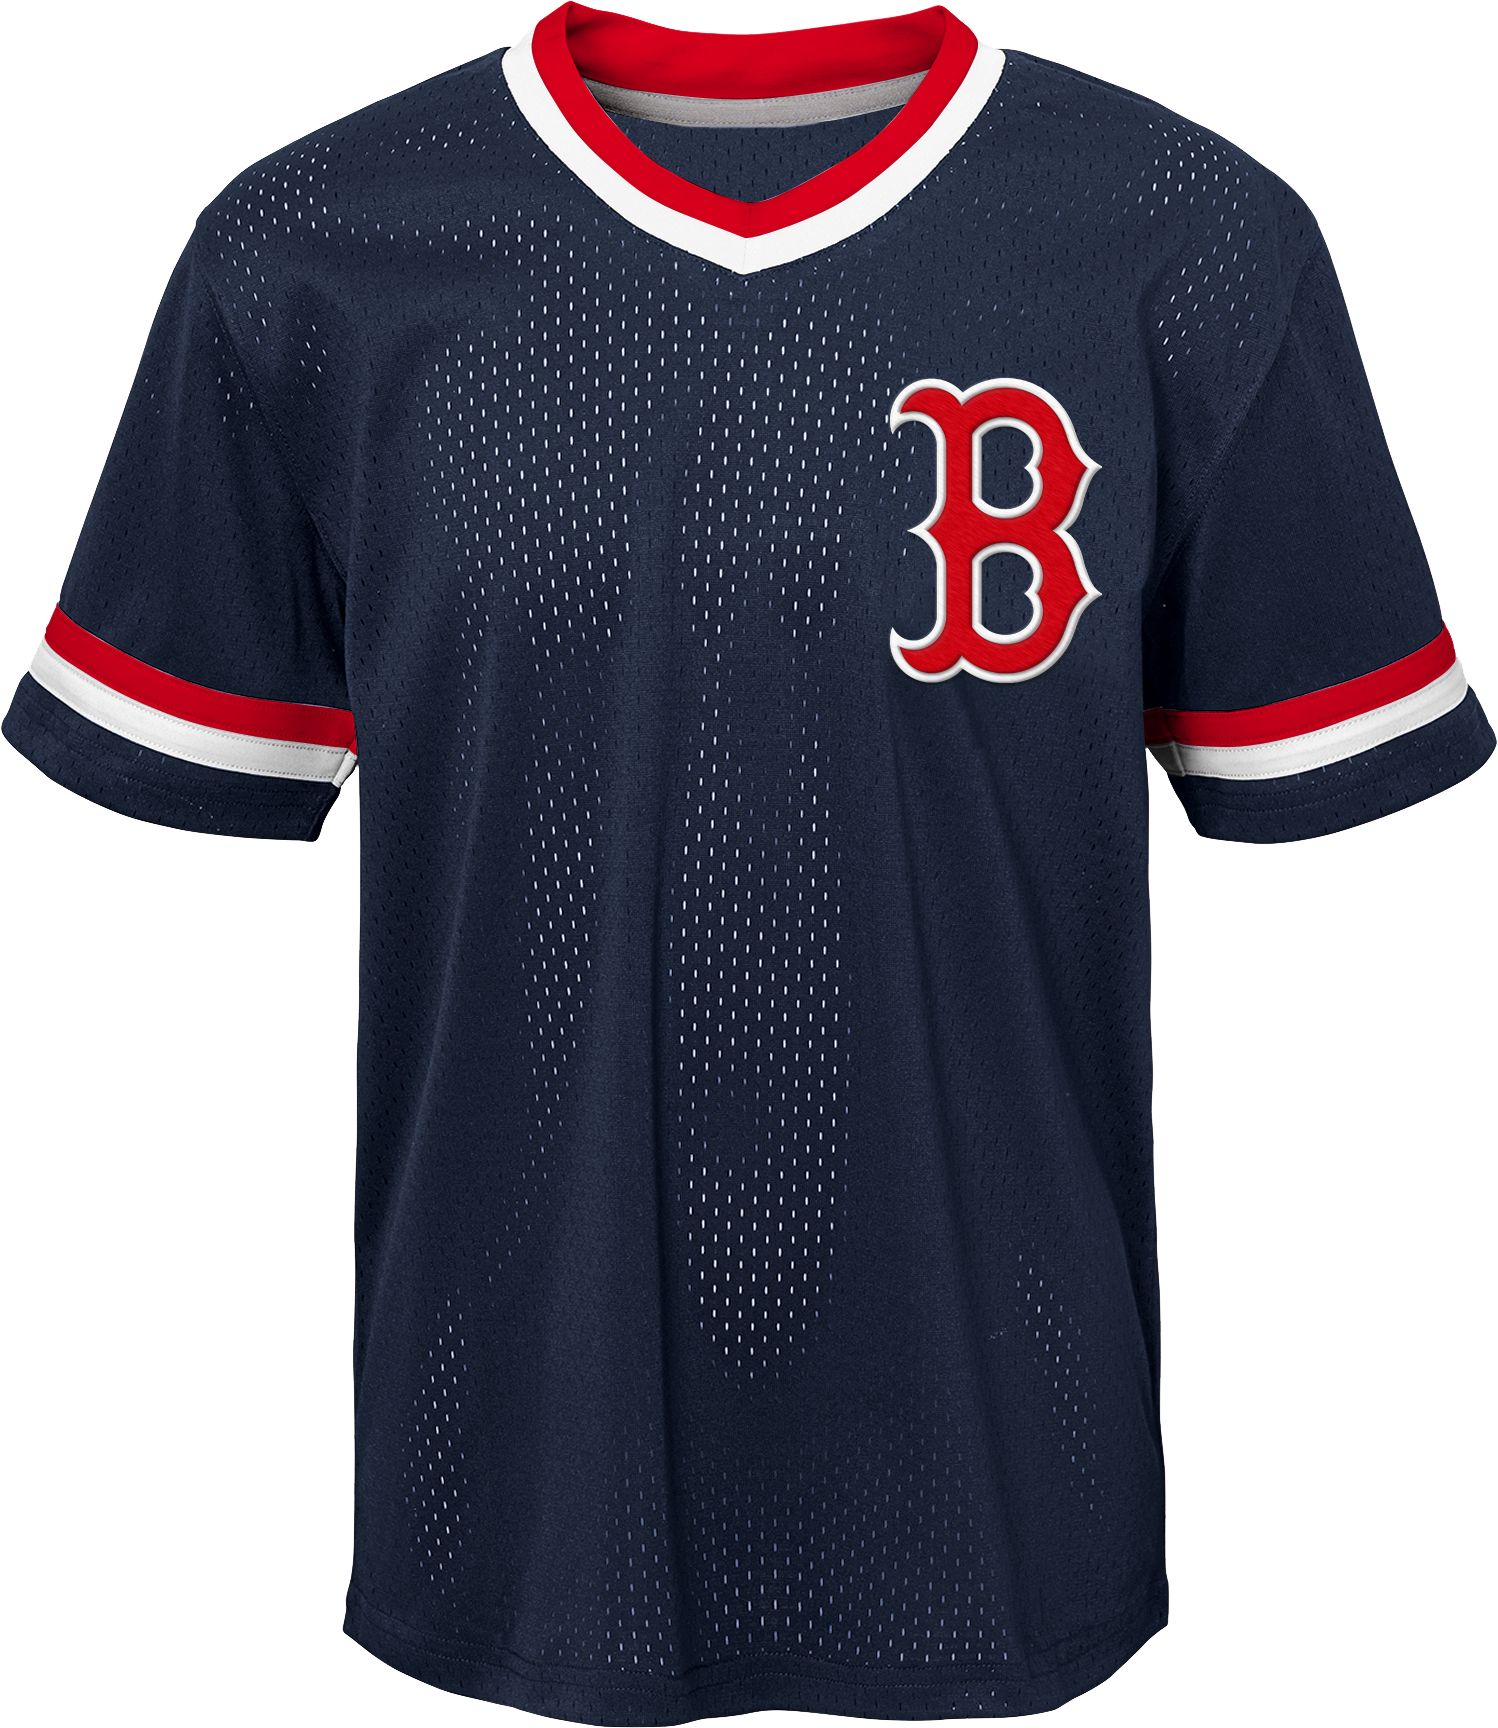 girls red sox jersey